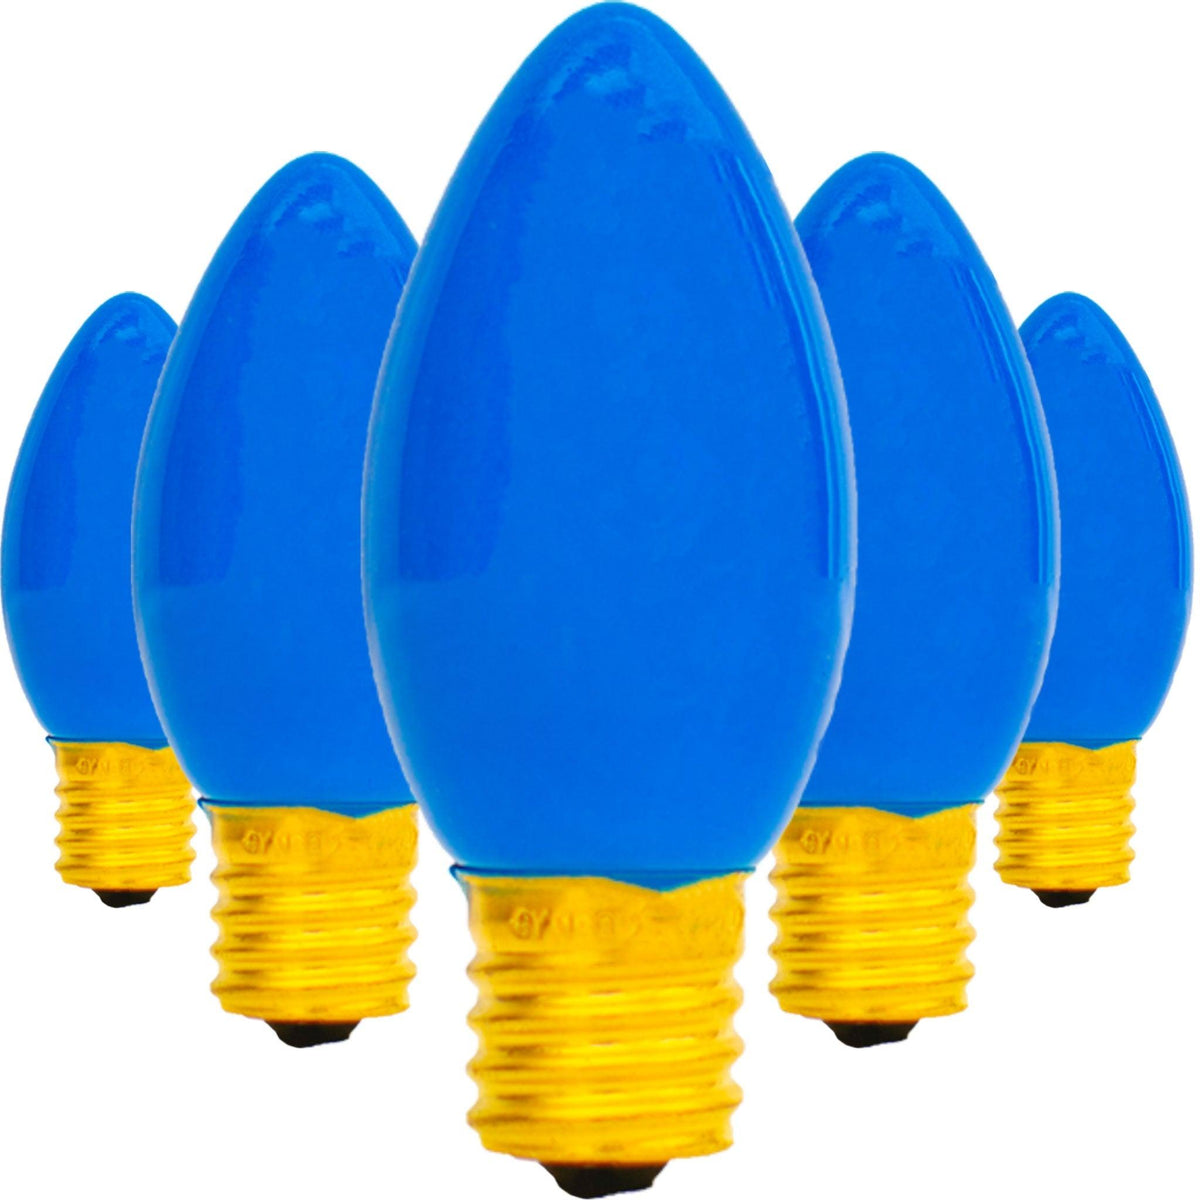 C-7 & C-9 Solid Ceramic Blue Christmas Light Bulbs.  Replace your old bulbs with a set of brand new Candelabra Lights.   Shop now at leedisplay.com